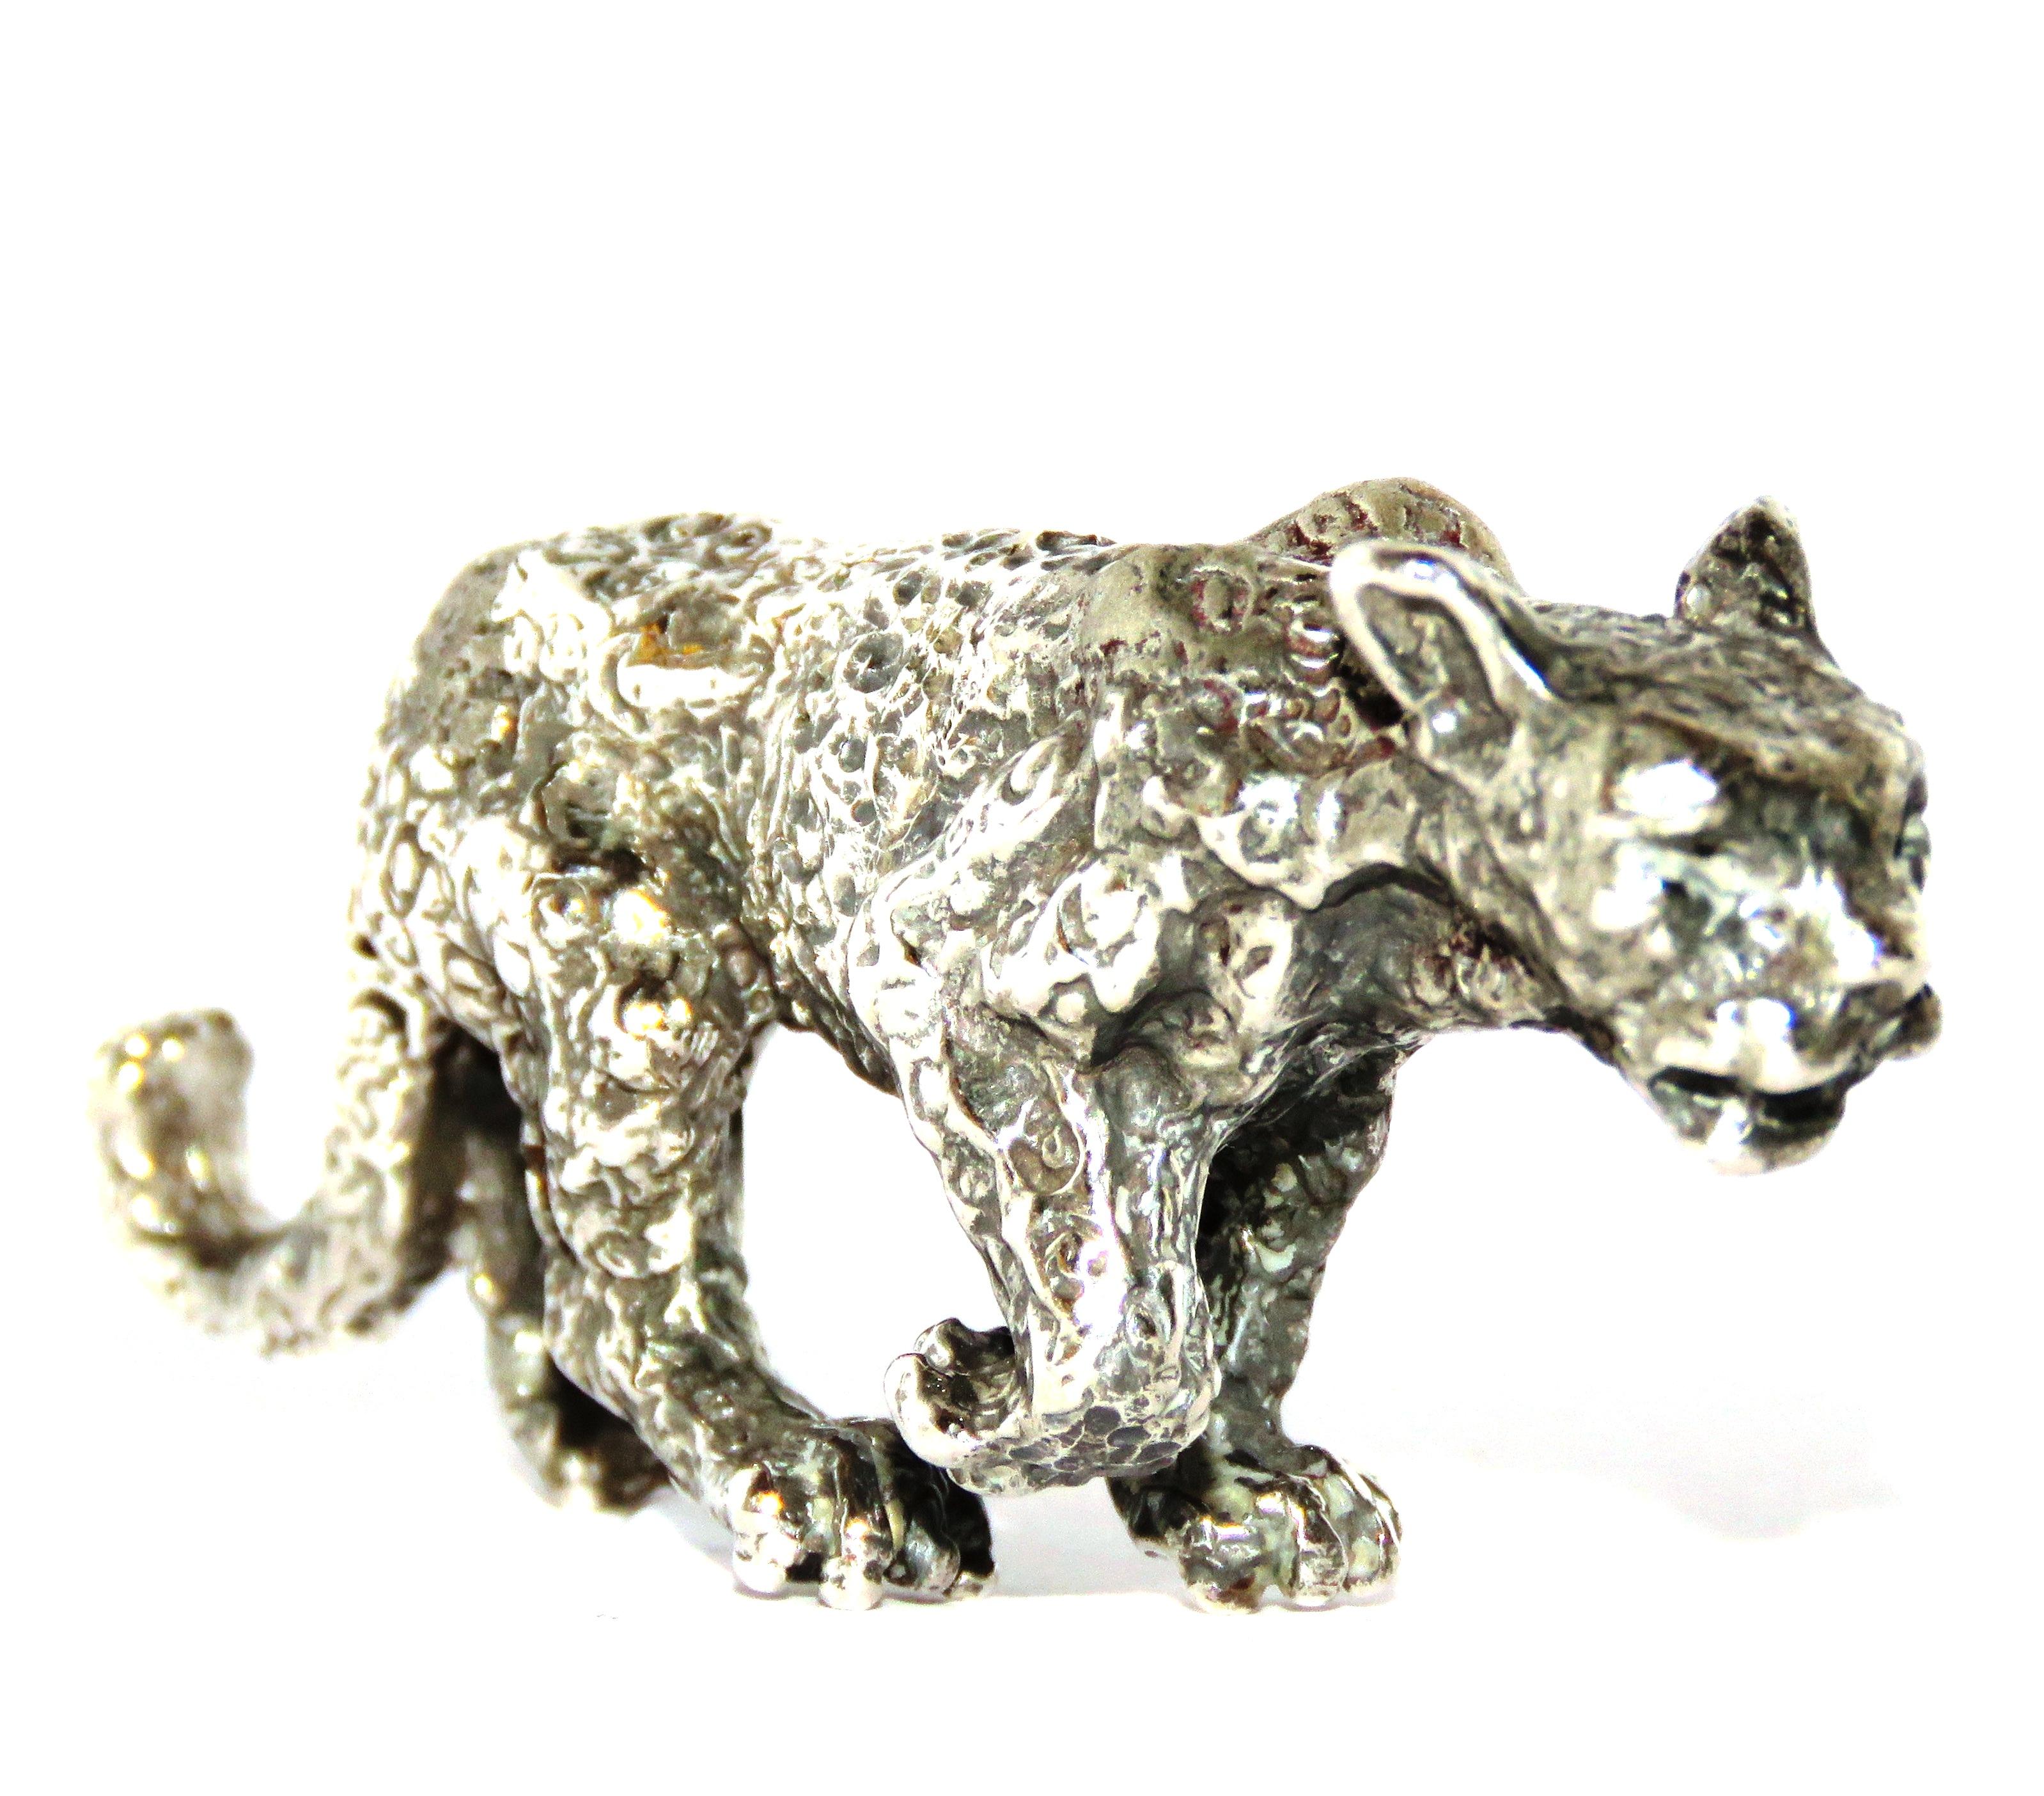 Solid silver leopard very good vintage condition.
Dimensions: Height 31 mm / 1.220 inches - Length 80 mm / 3.149 inches - Weight 75 grams.
It  is stamped with the Silver Italian Mark 800 - Italian brandmark 235AR - Made in